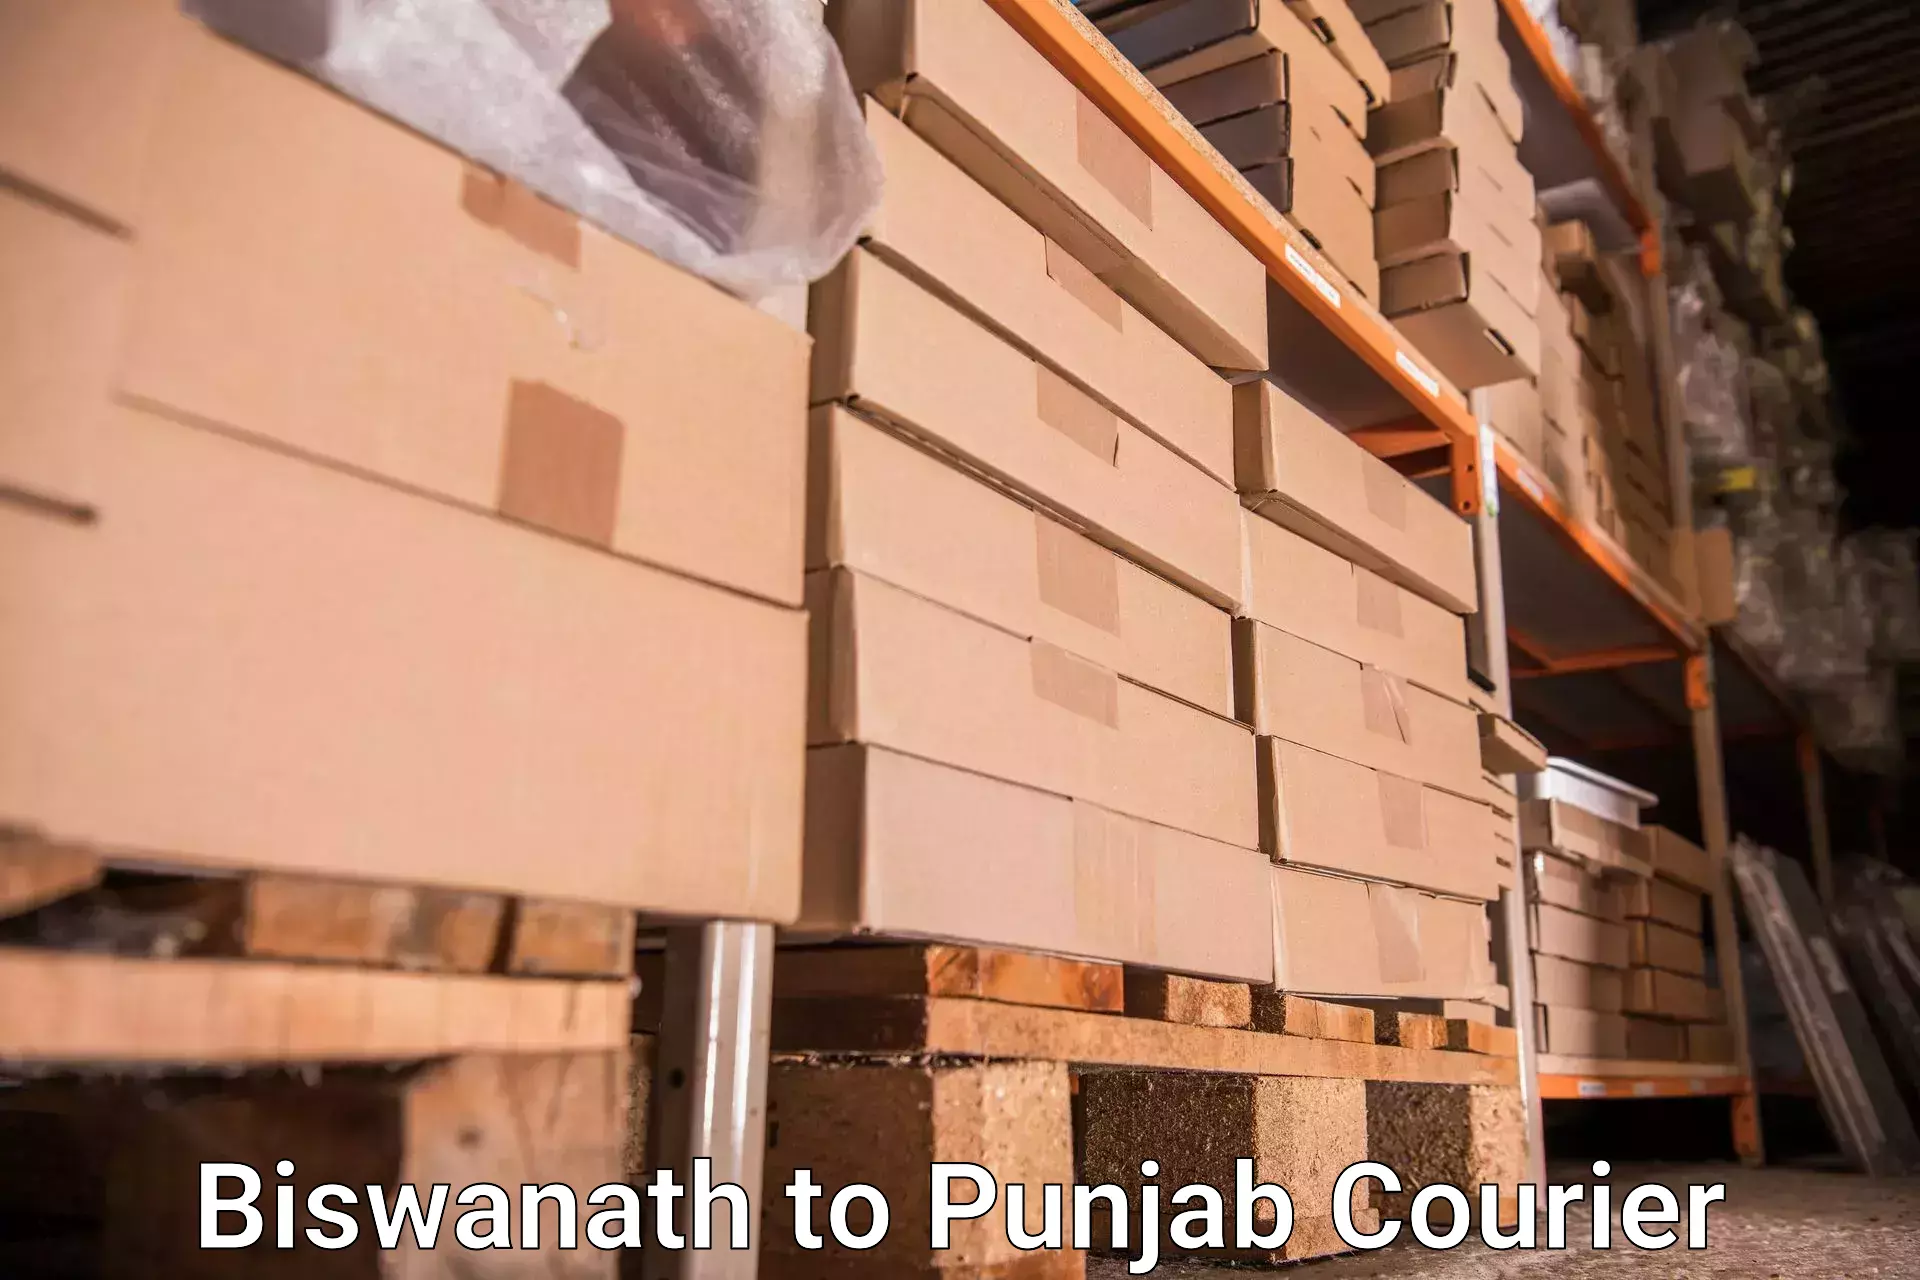 Baggage transport coordination Biswanath to Mohali